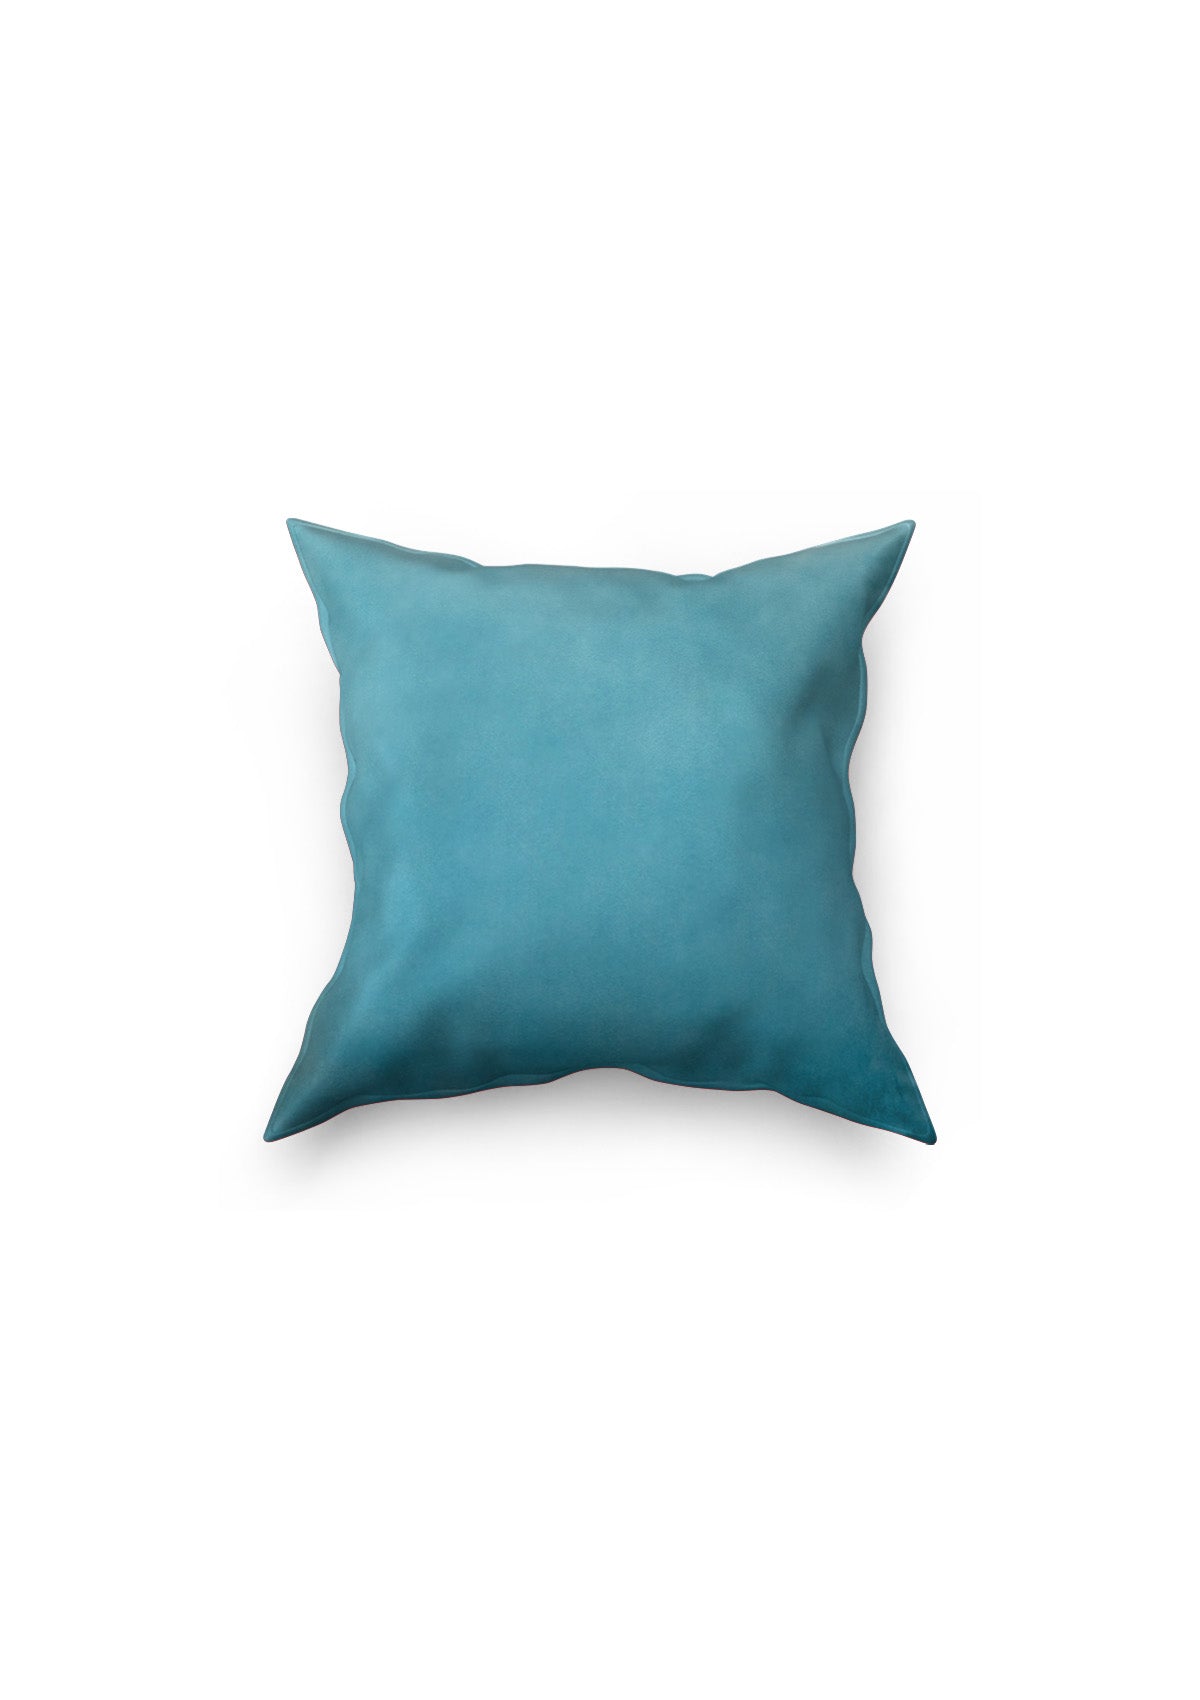 Light Teal Serenity Cushion Covers | CovermyCushion